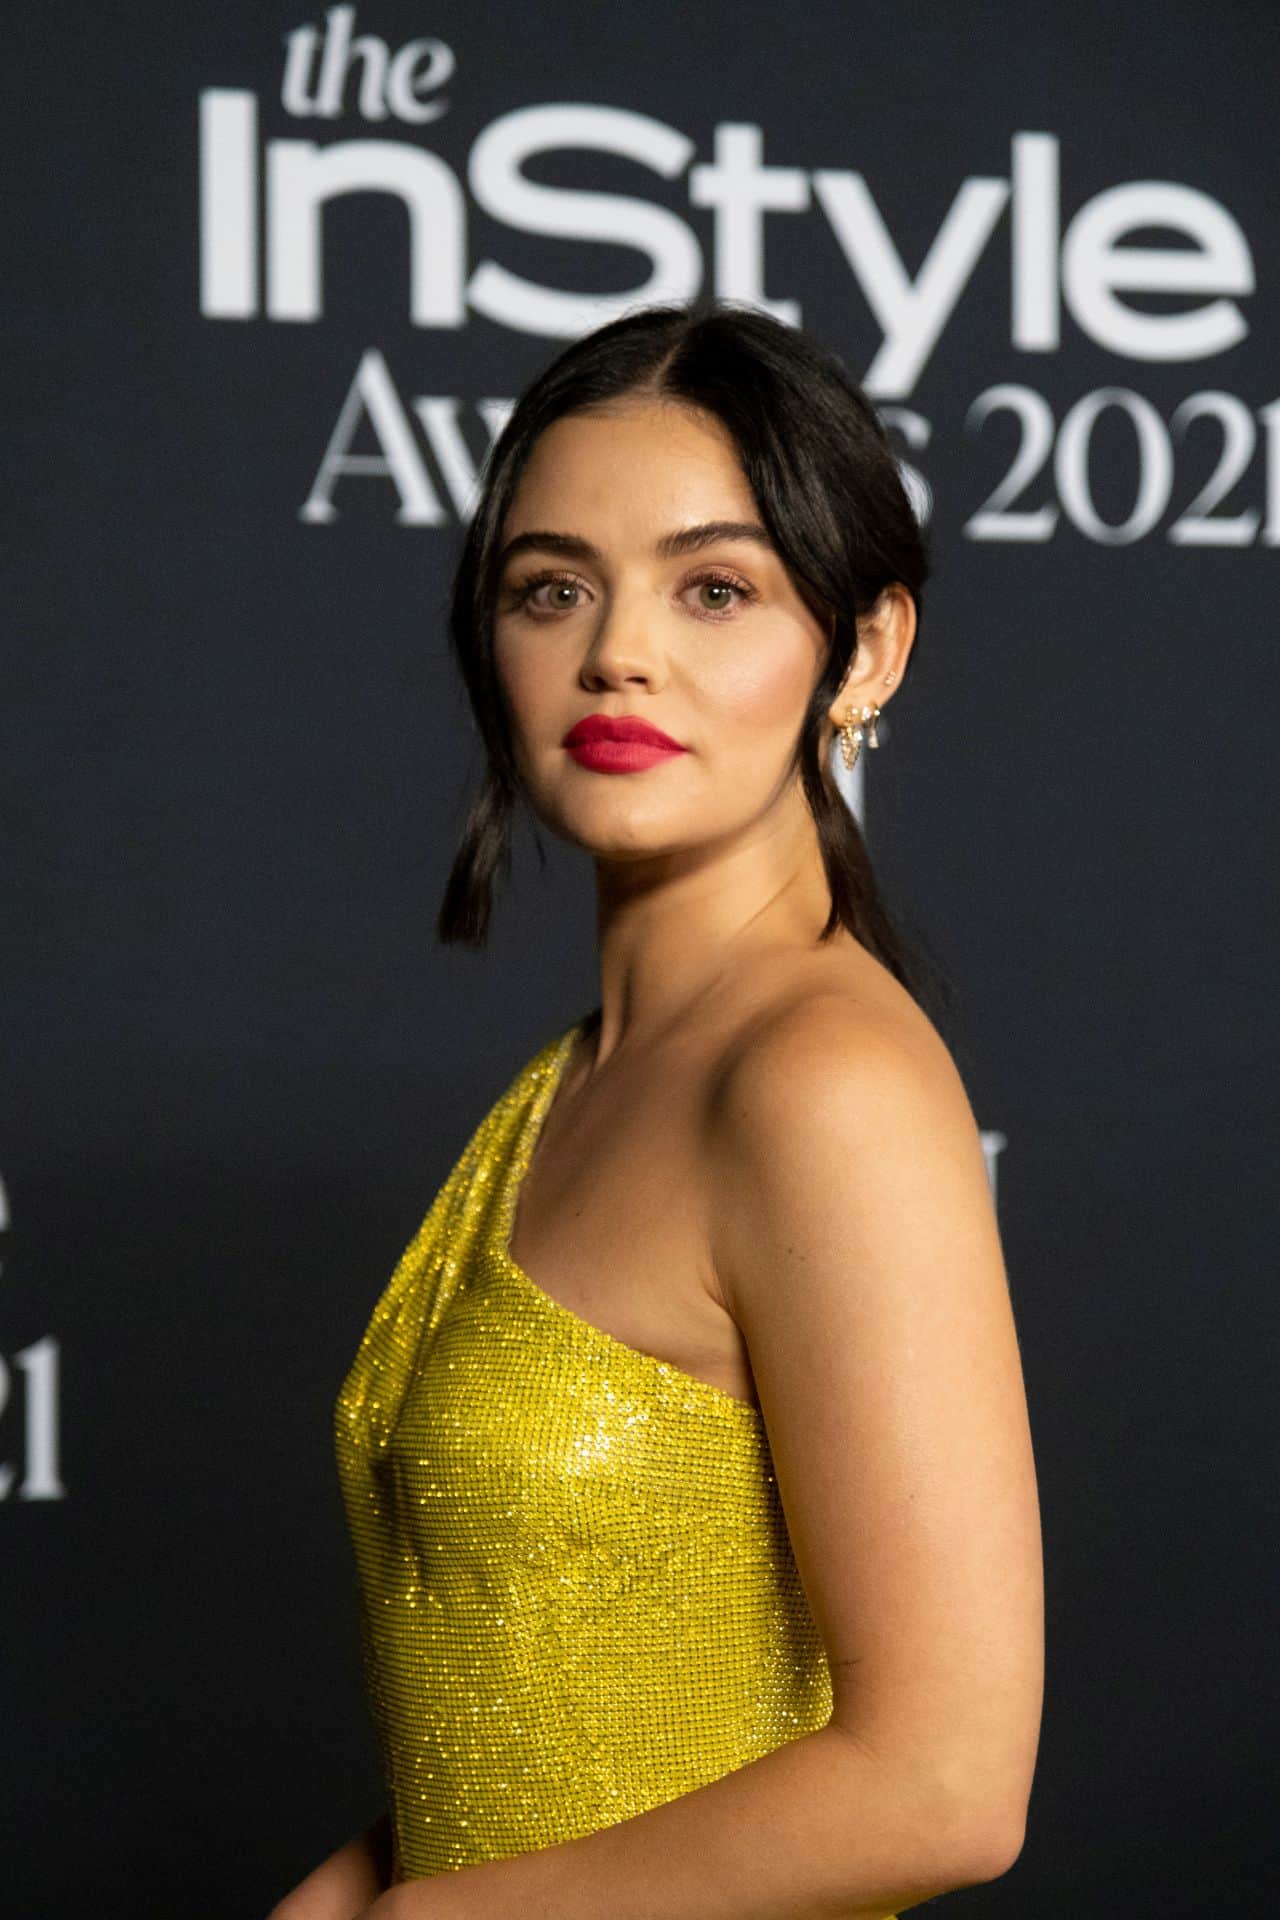 Lucy Hale Looked Like Pure Gold in a Sparkly Dress at Instyle Awards in LA